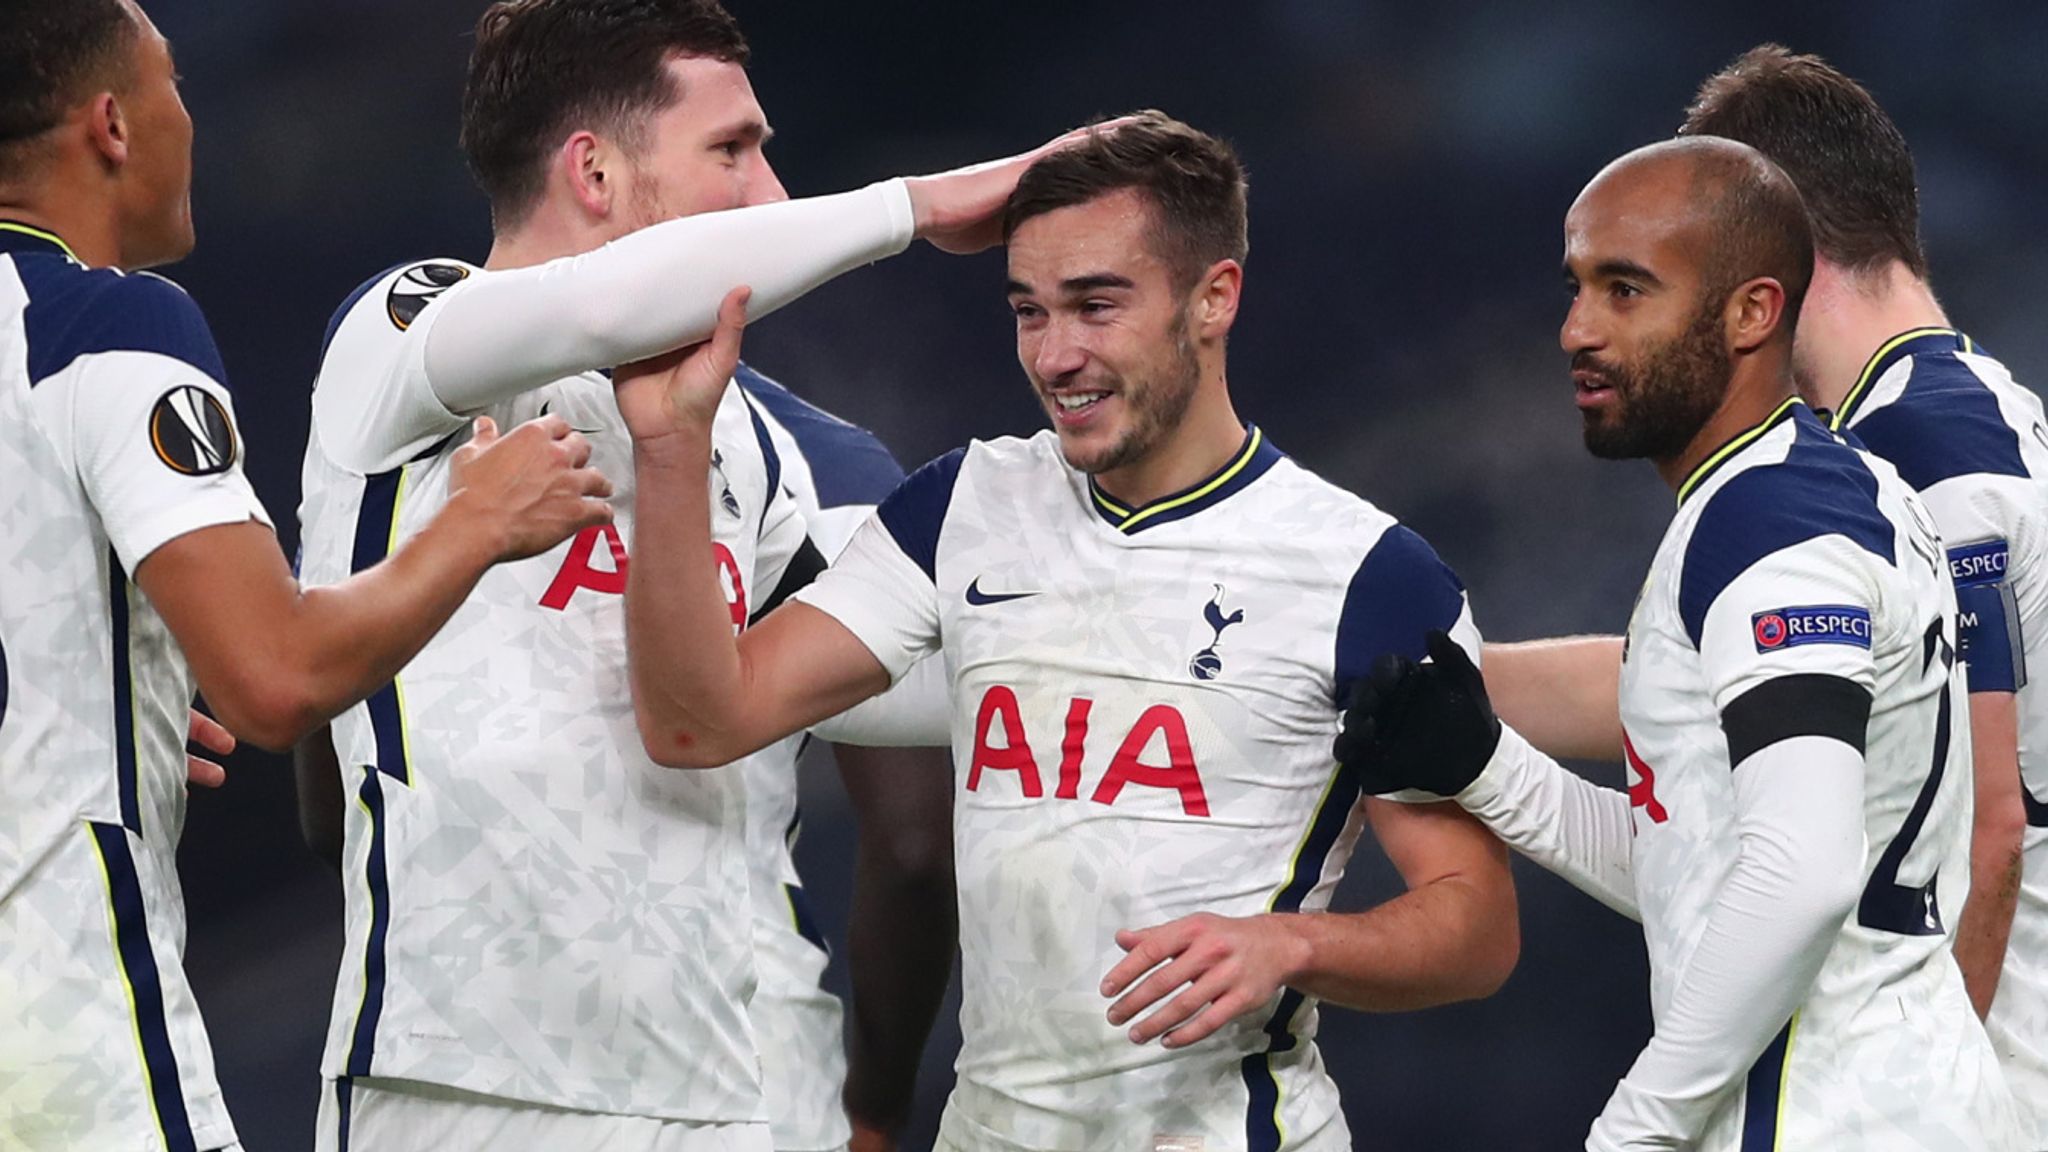 Tottenham 4 0 Ludogorets Carlos Vinicius Double Sets Spurs On Way To Big Victory Football News Sky Sports